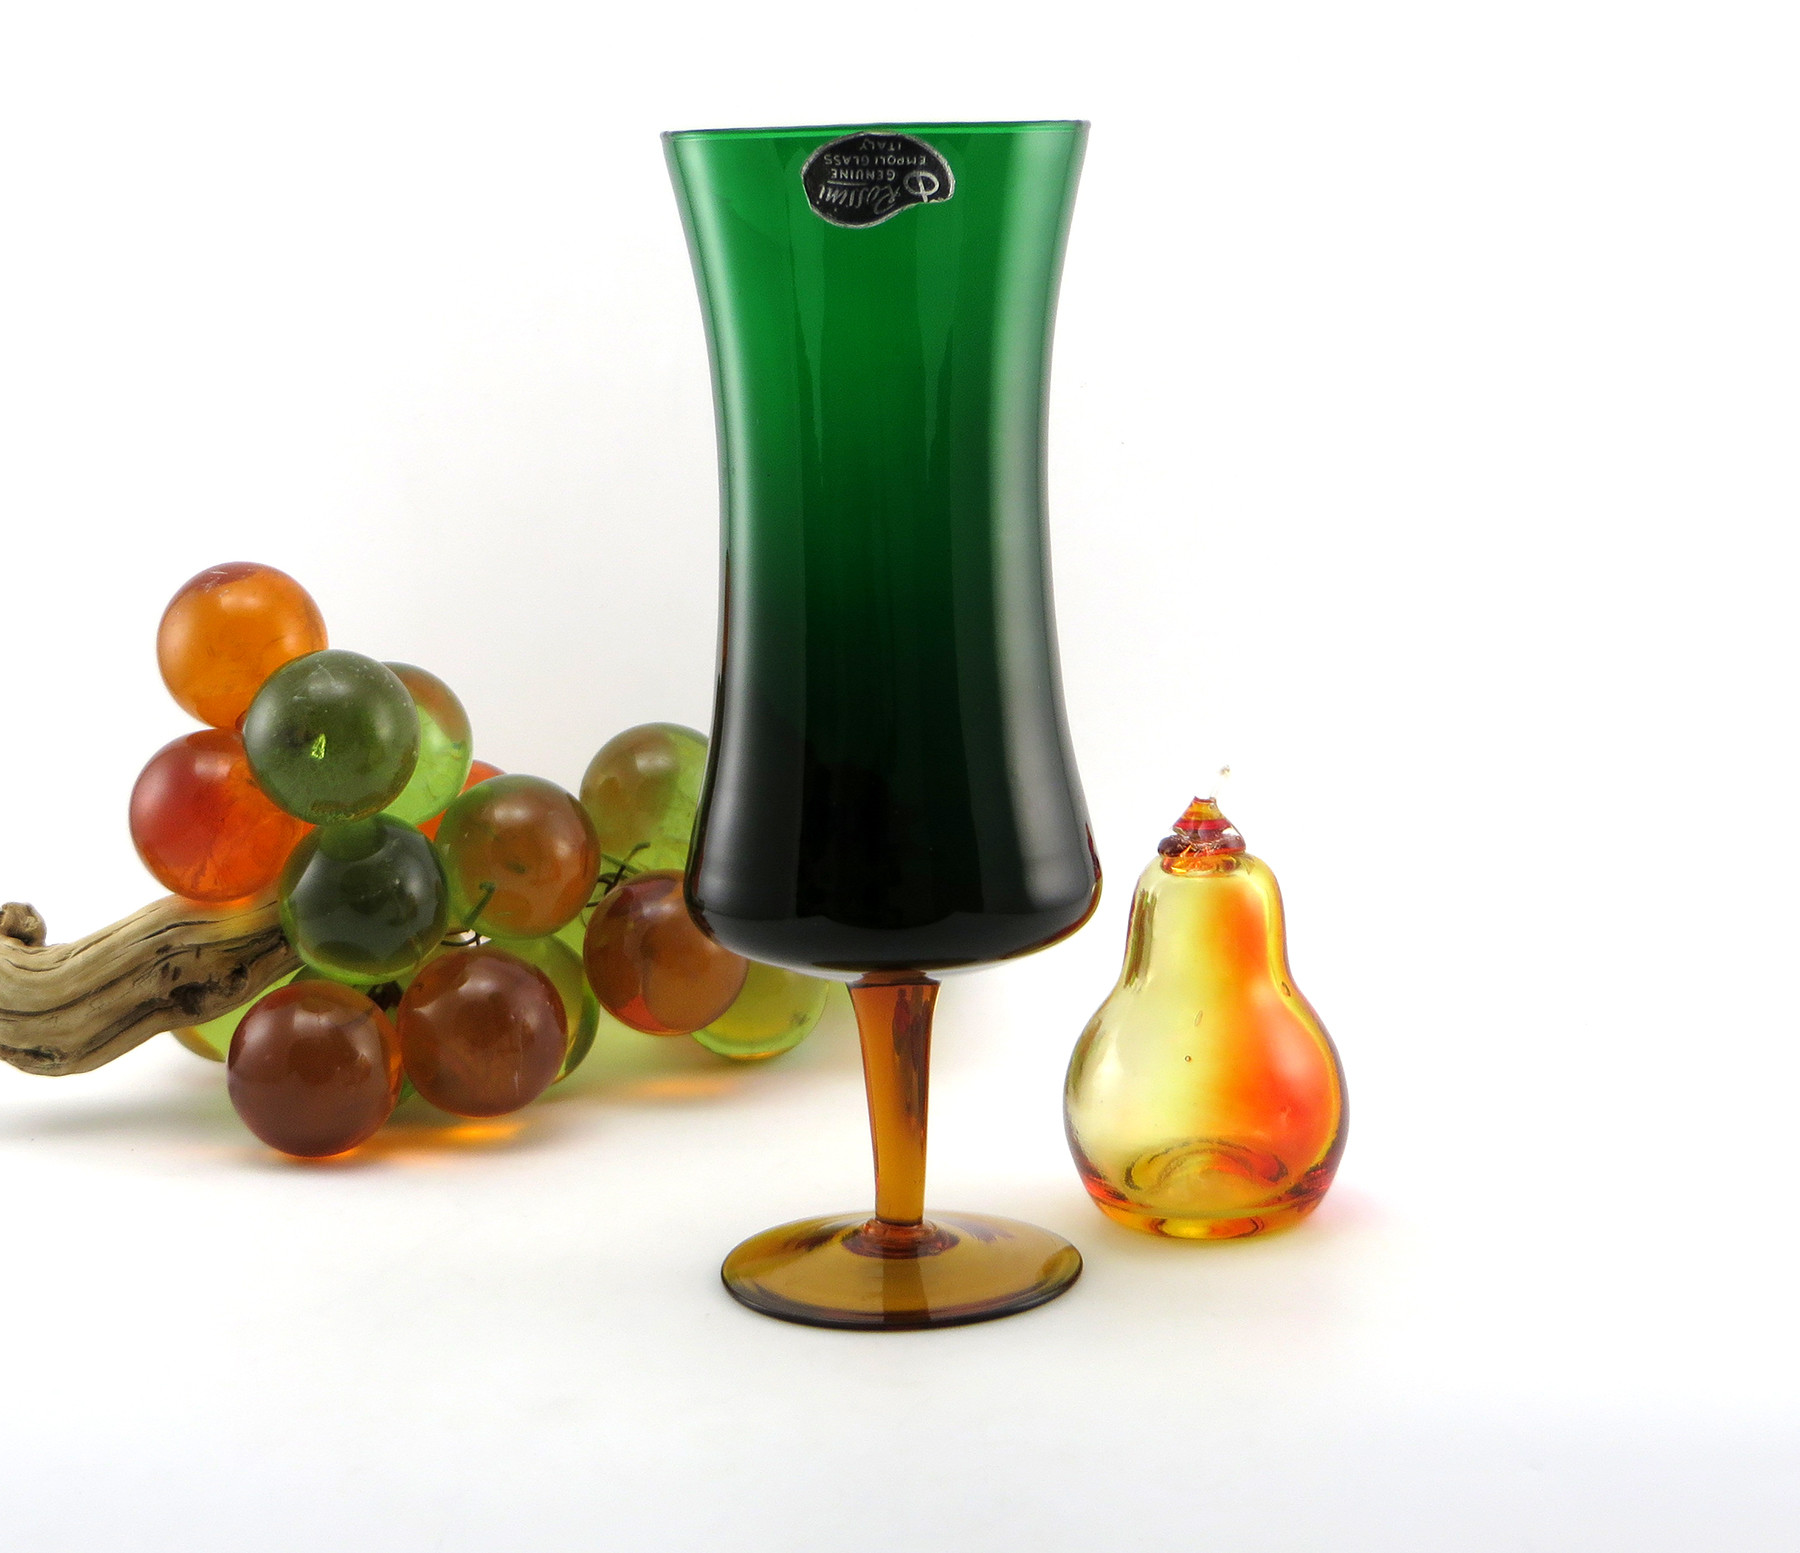 17 attractive Large Glass Vase with Stand 2024 free download large glass vase with stand of rossini empoli art glass retro modern vase with label retro art glass throughout rossini empoli art glass retro modern vase with label